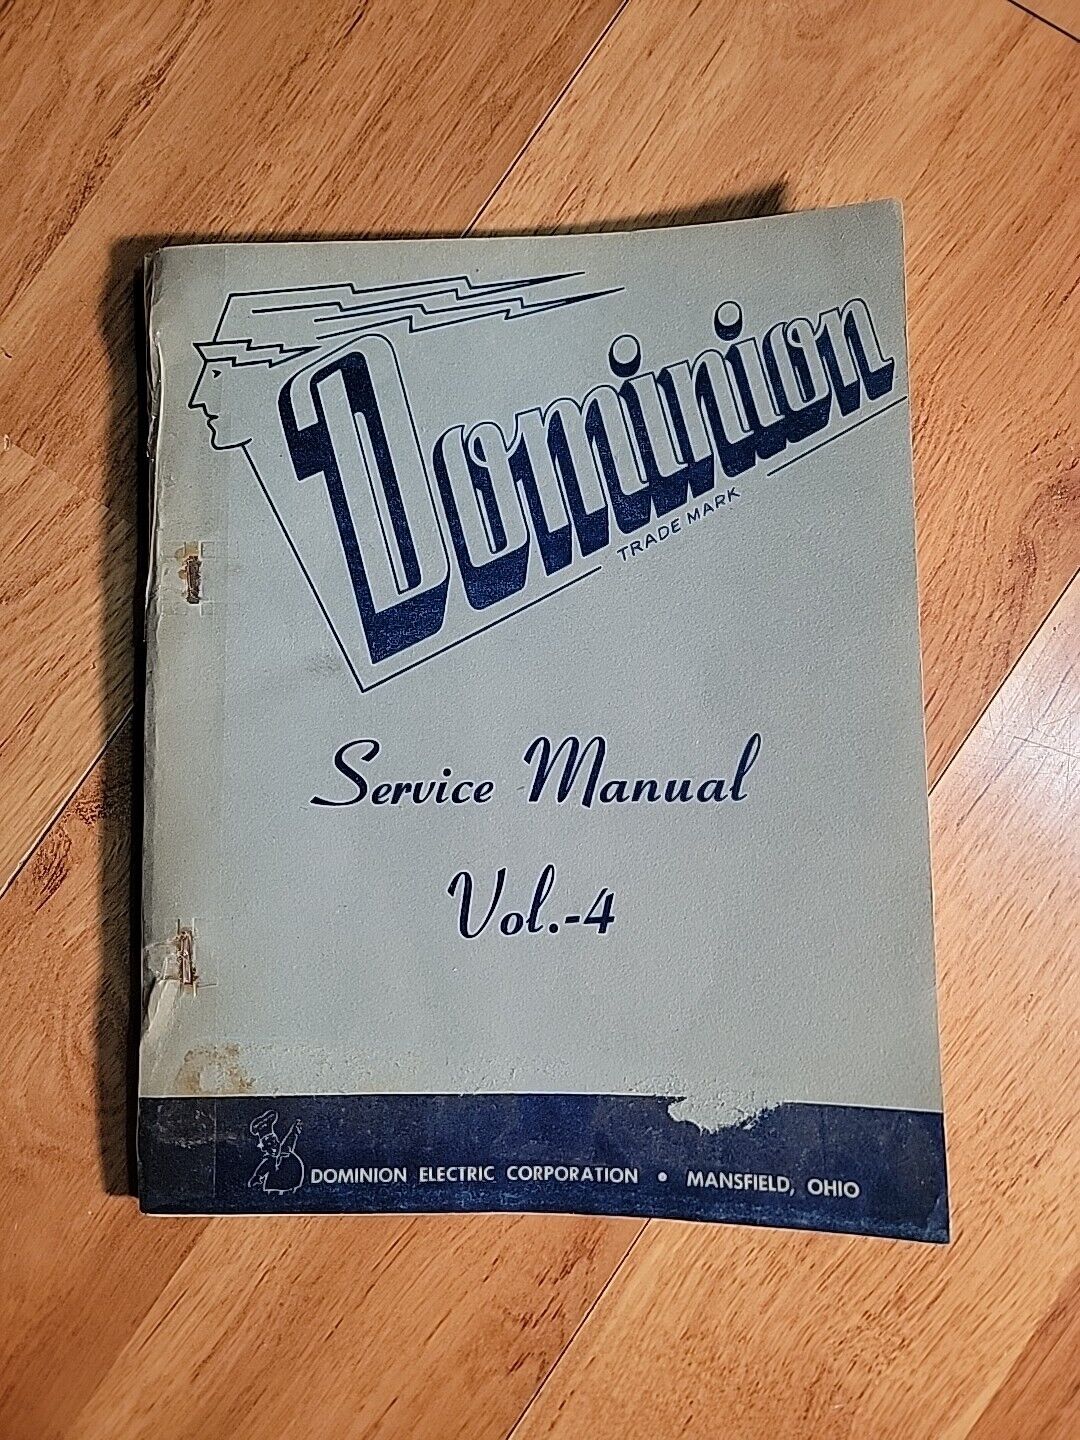 Vintage Dominion Applicance Service Manual Vol 4 toaster iron coffee maker waffl